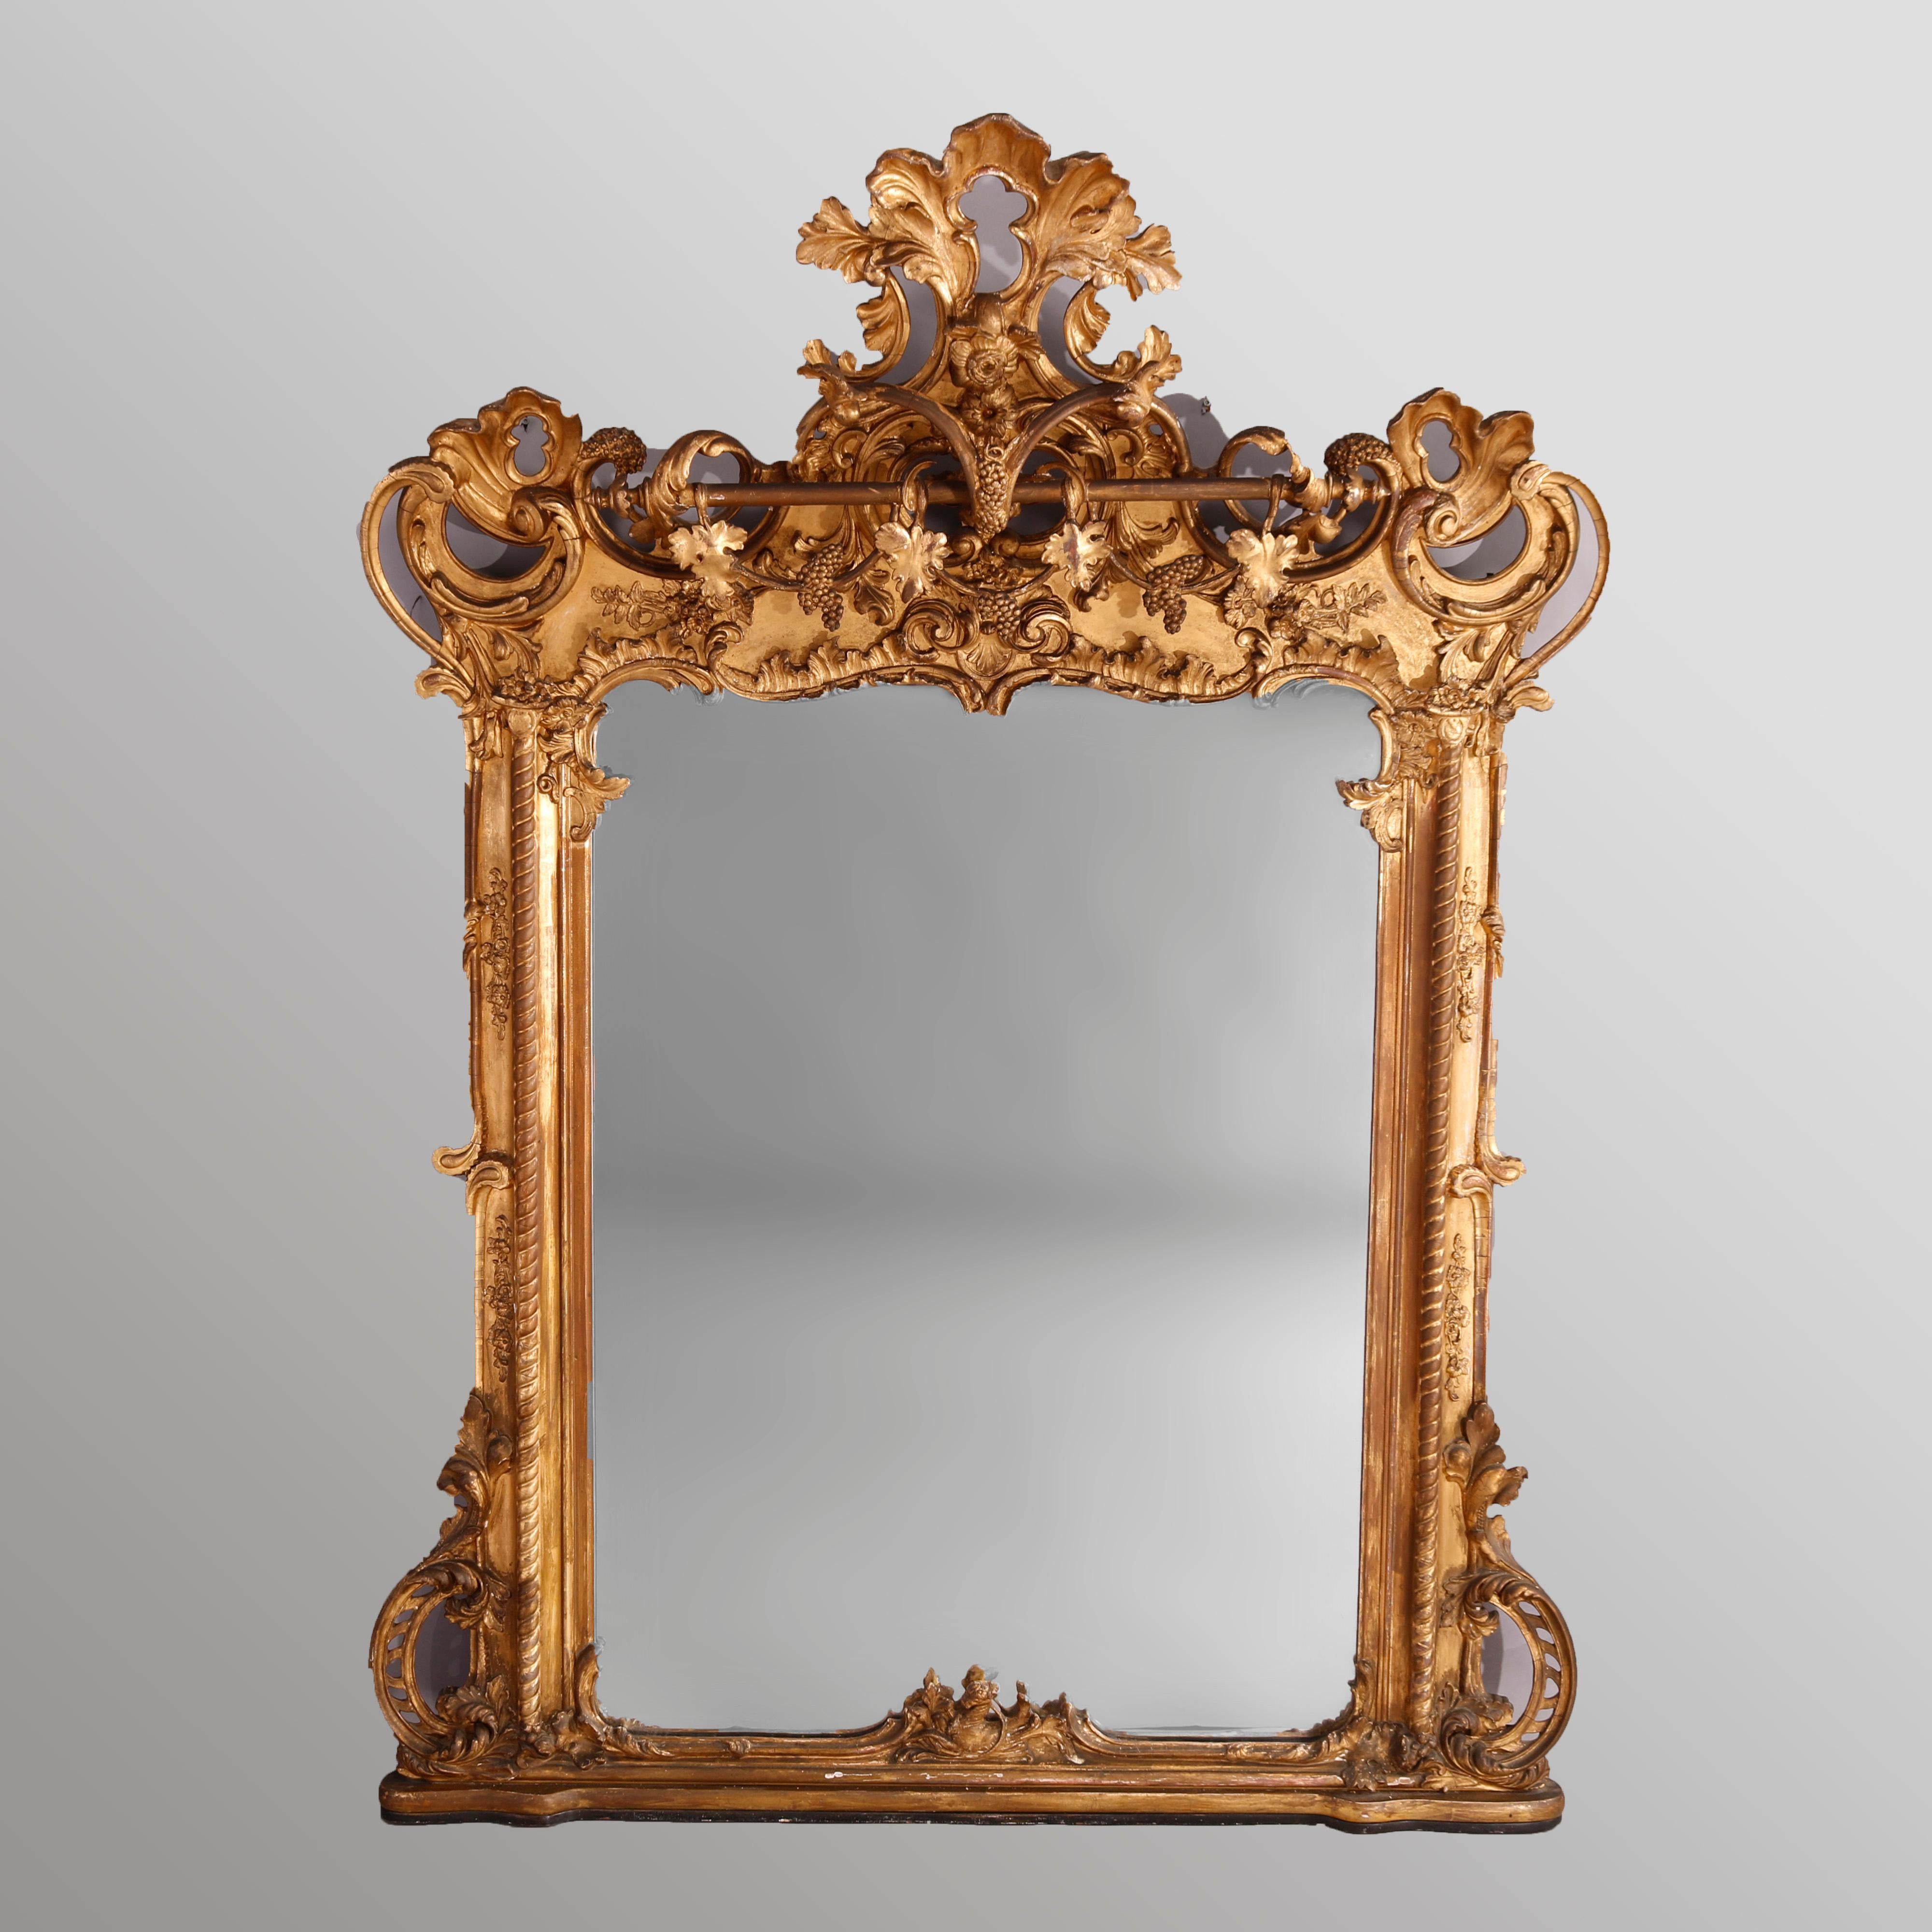 A large antique French Rococo over mantle pier mirror offers carved wood construction having gold leaf with pierced foliate crest over frame with scroll and foliate elements, 19th century

Measures- 79''H x 58''W x 16''D.